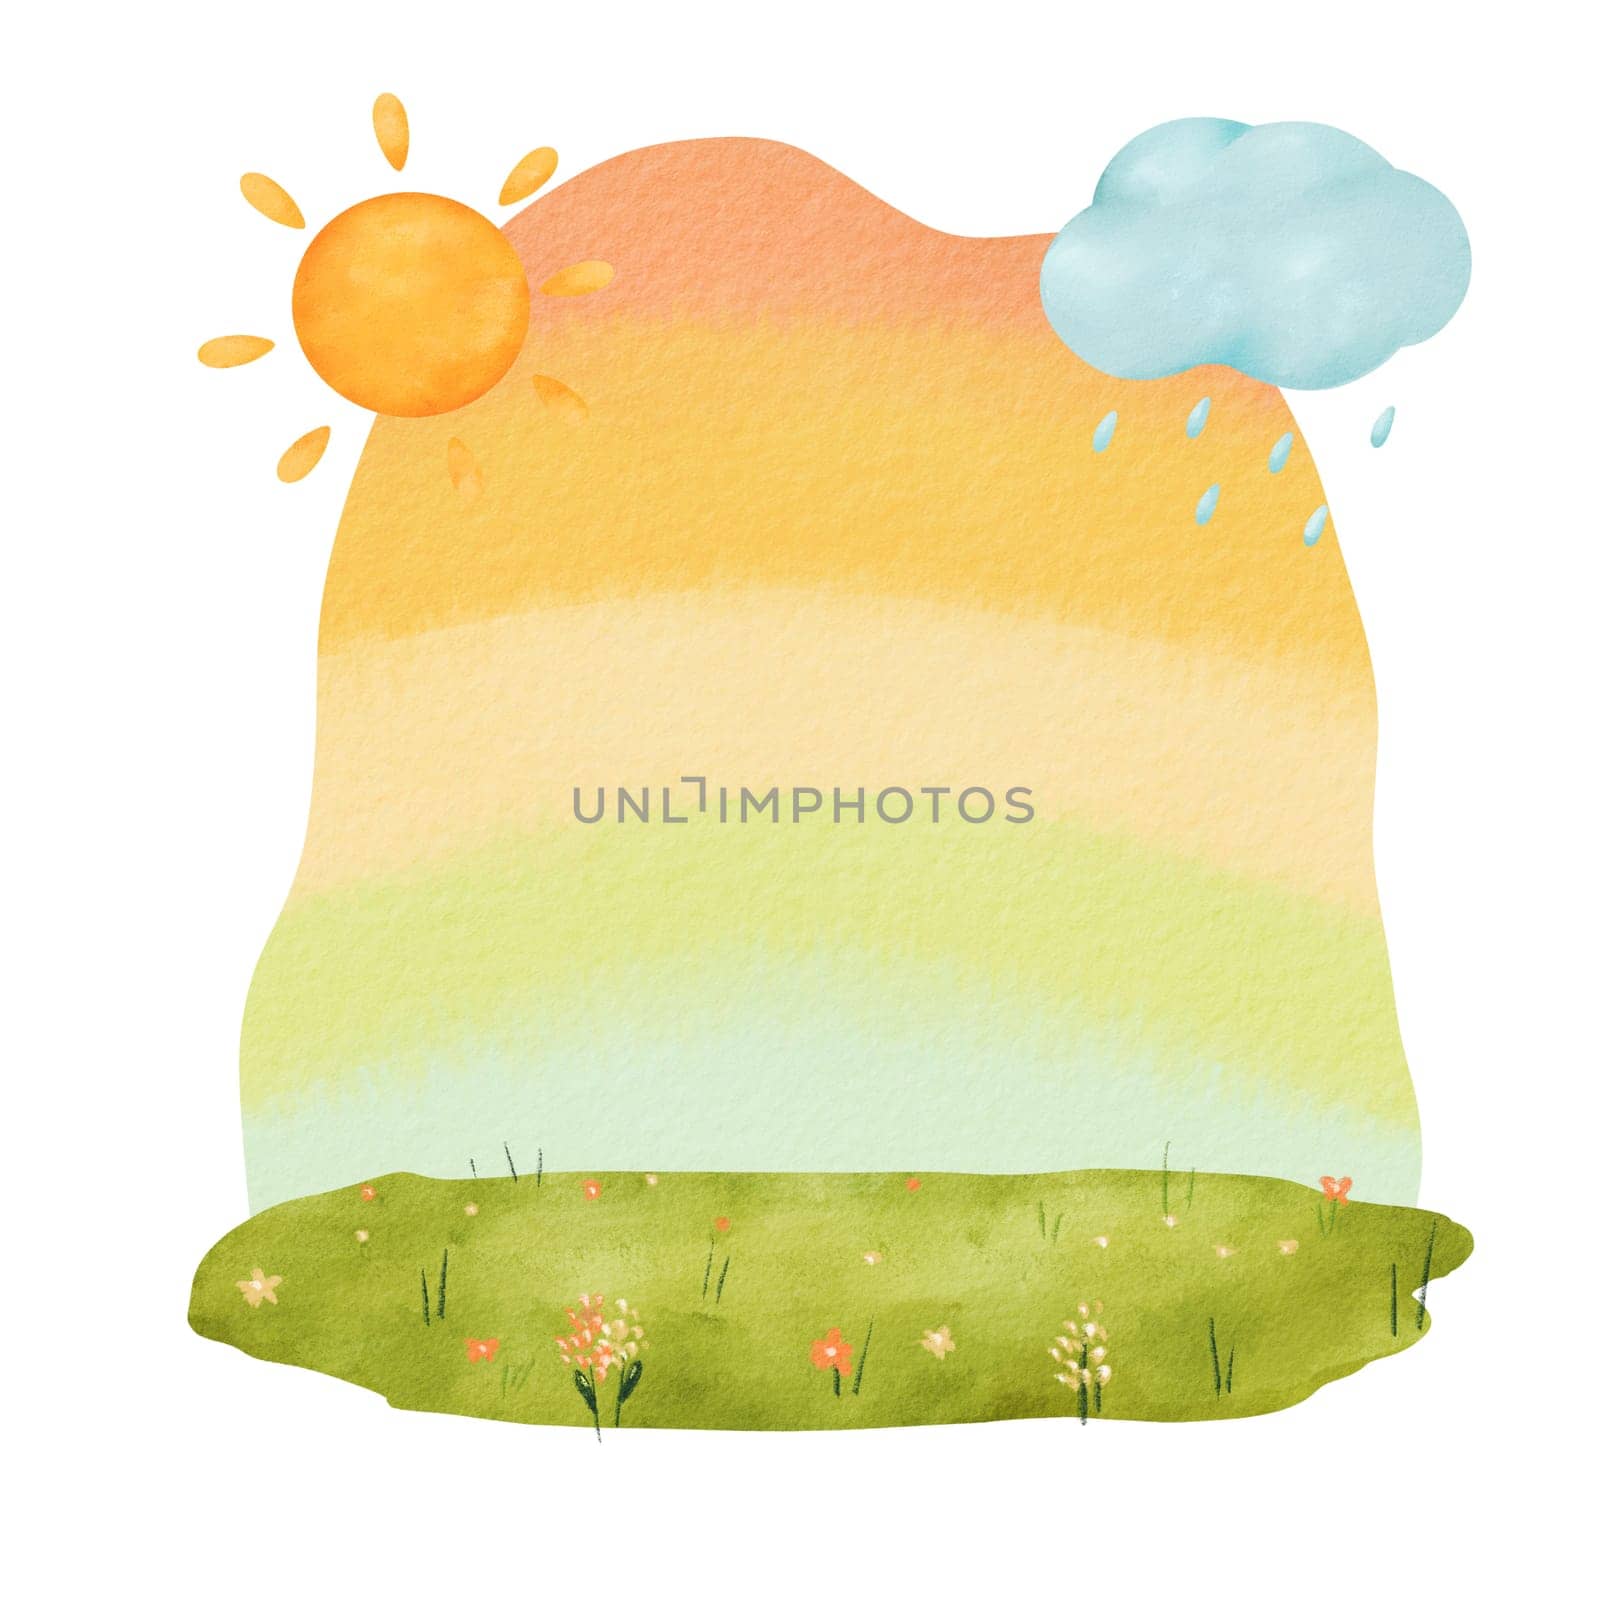 watercolor background for children's illustrations. composition is a green meadow with flowers, a soft rainbow backdrop, and the playful elements of sun and rain. for books, posters, and designs.